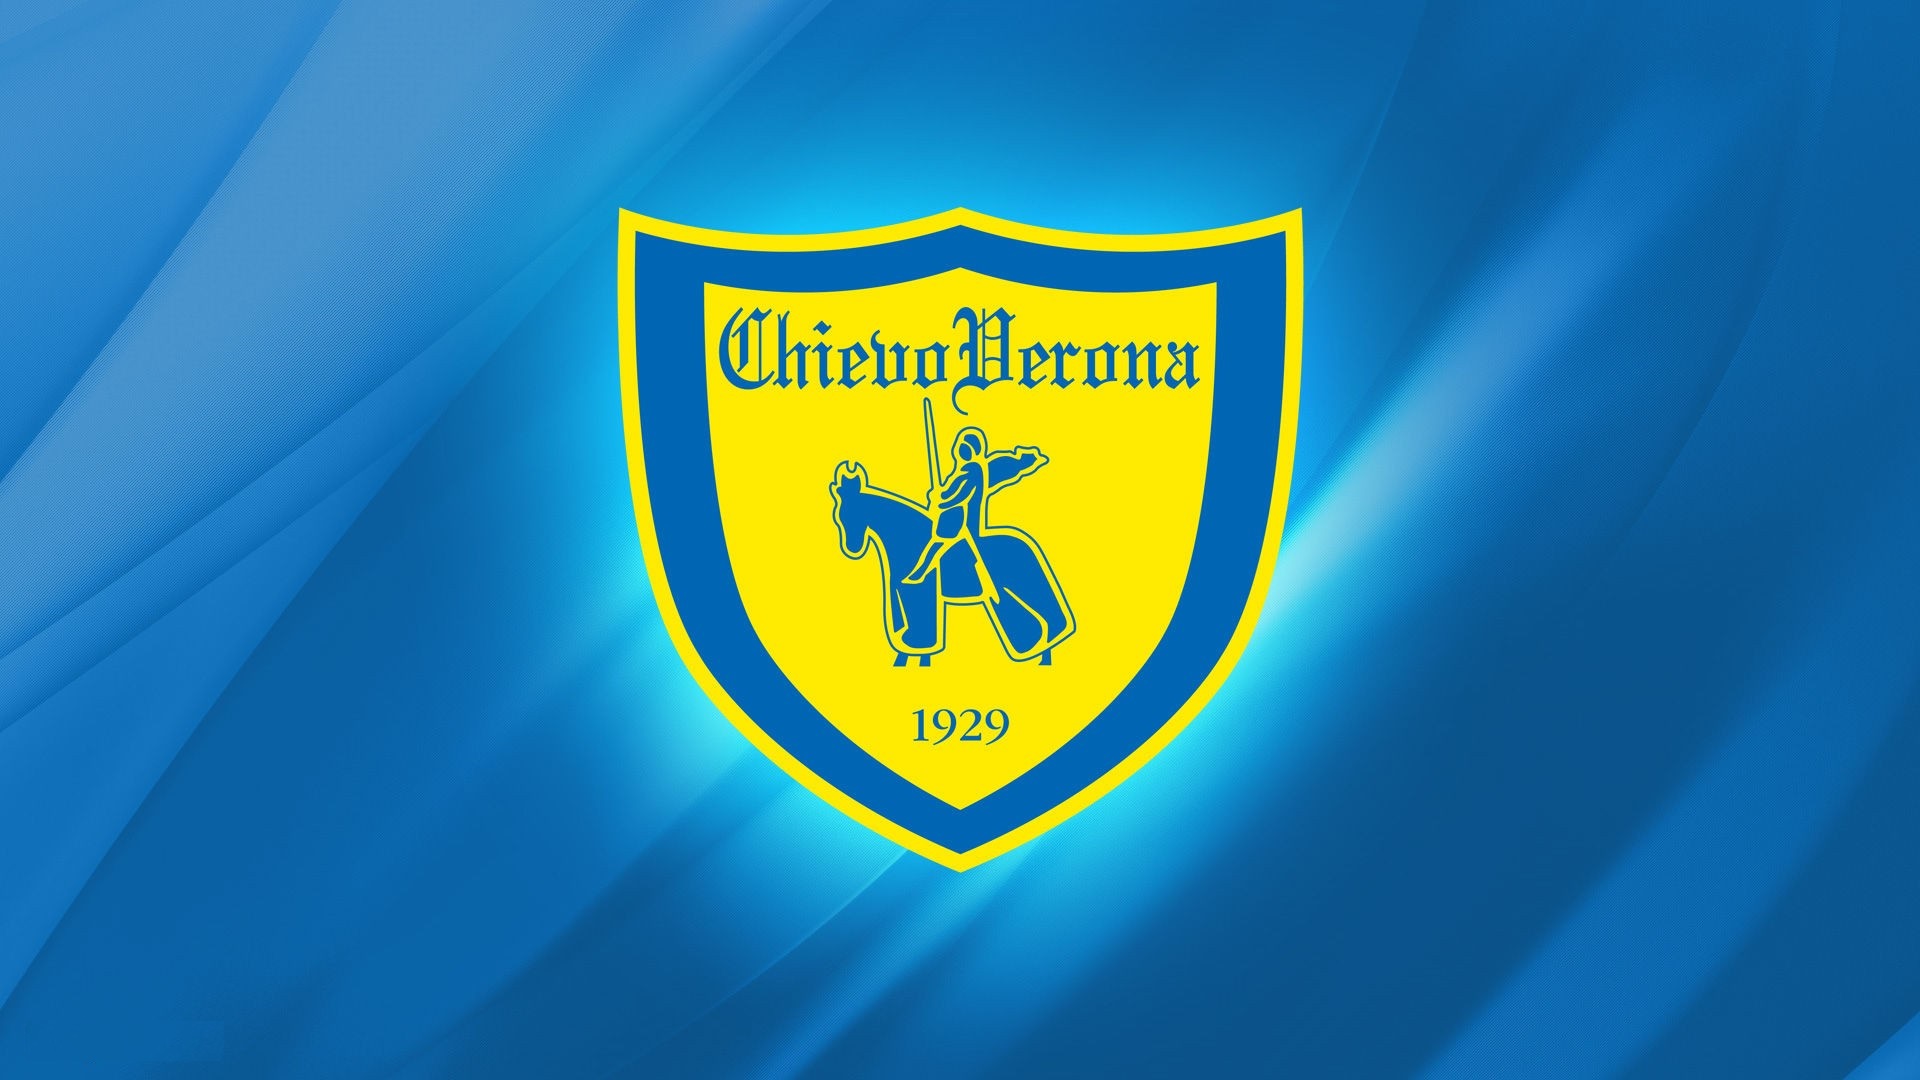 AC Chievo Verona Wallpaper HD With high-resolution 1920X1080 pixel. You can use this wallpaper for your Desktop Computers, Mac Screensavers, Windows Backgrounds, iPhone Wallpapers, Tablet or Android Lock screen and another Mobile device